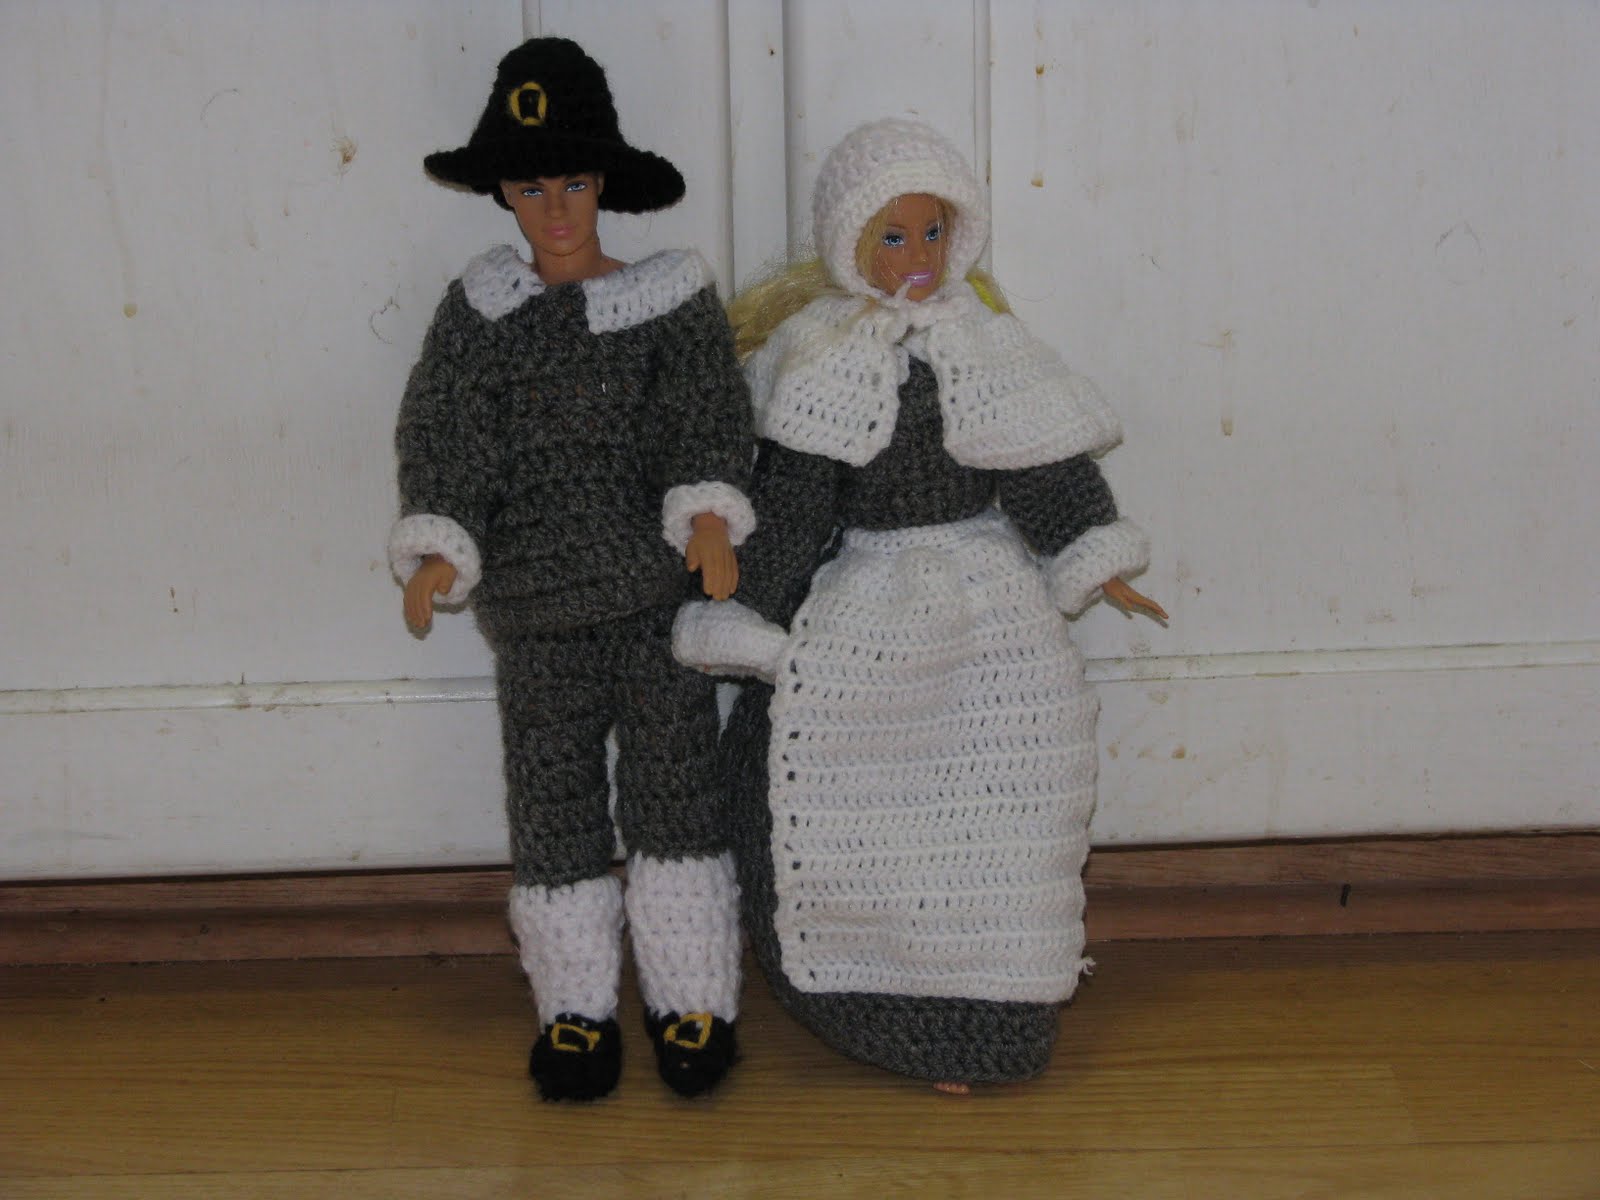 Free Doll Making Projects and Doll Pa
tterns at AllCrafts